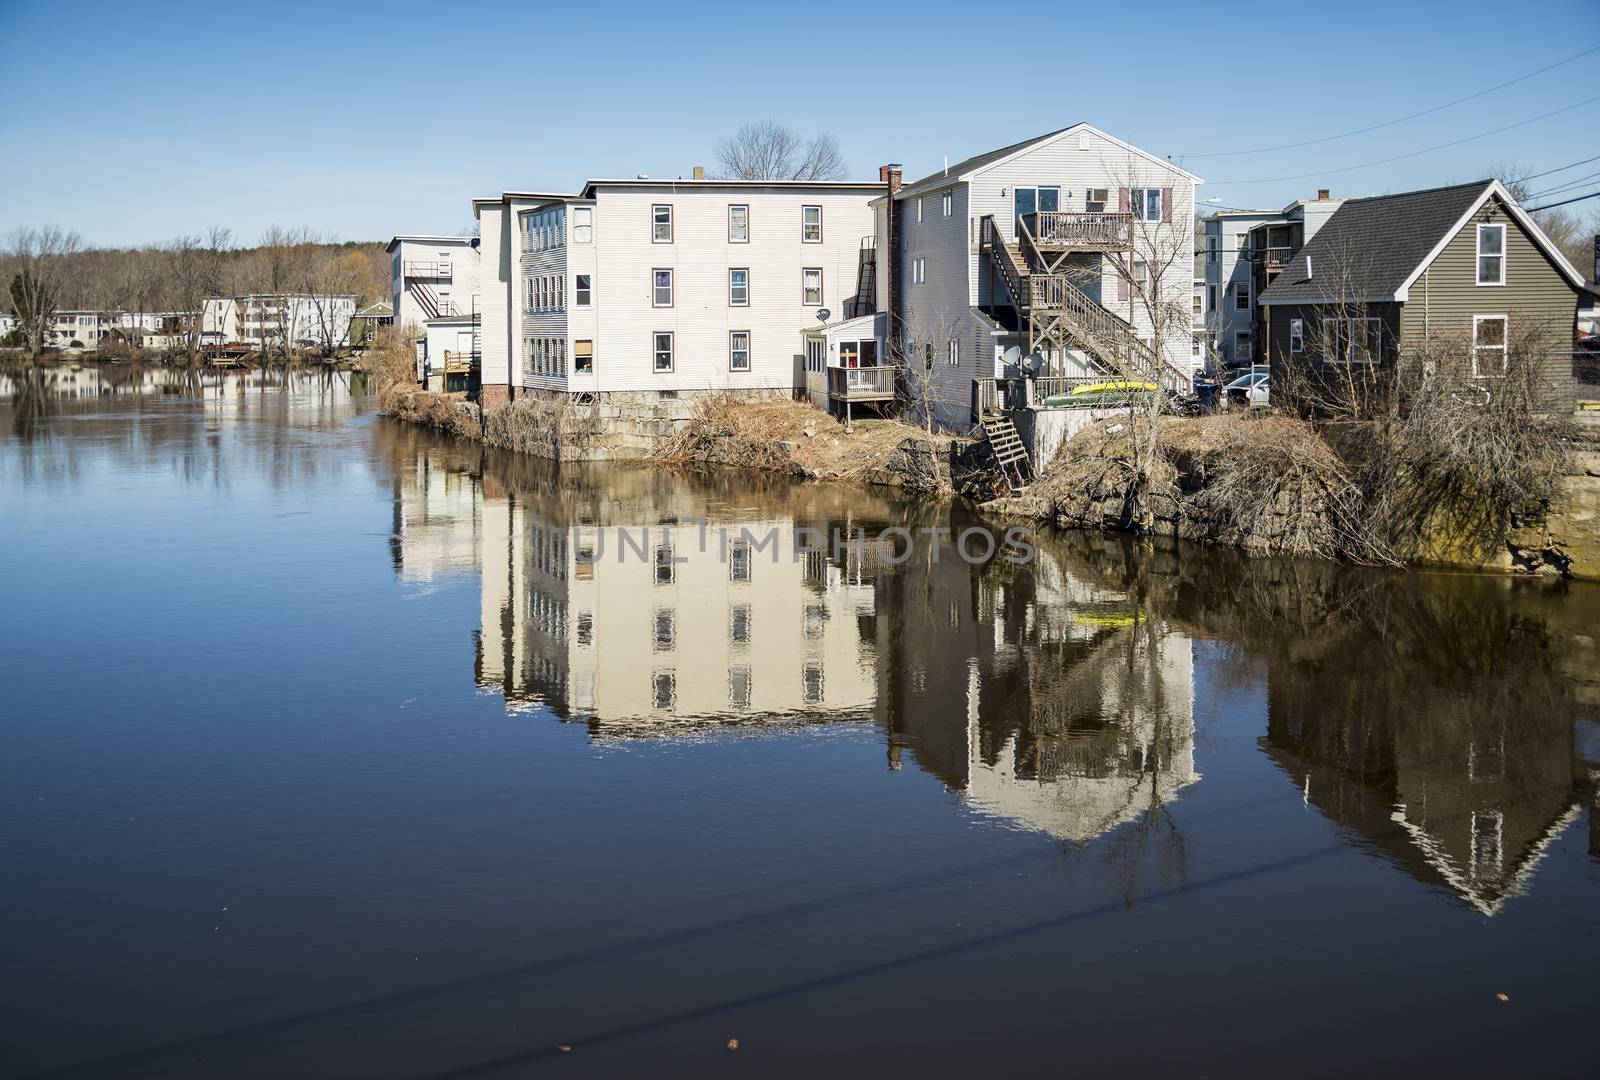 Houses on the Saco River. The river adjoining the two towns of Biddeford and Saco in Maine, USA